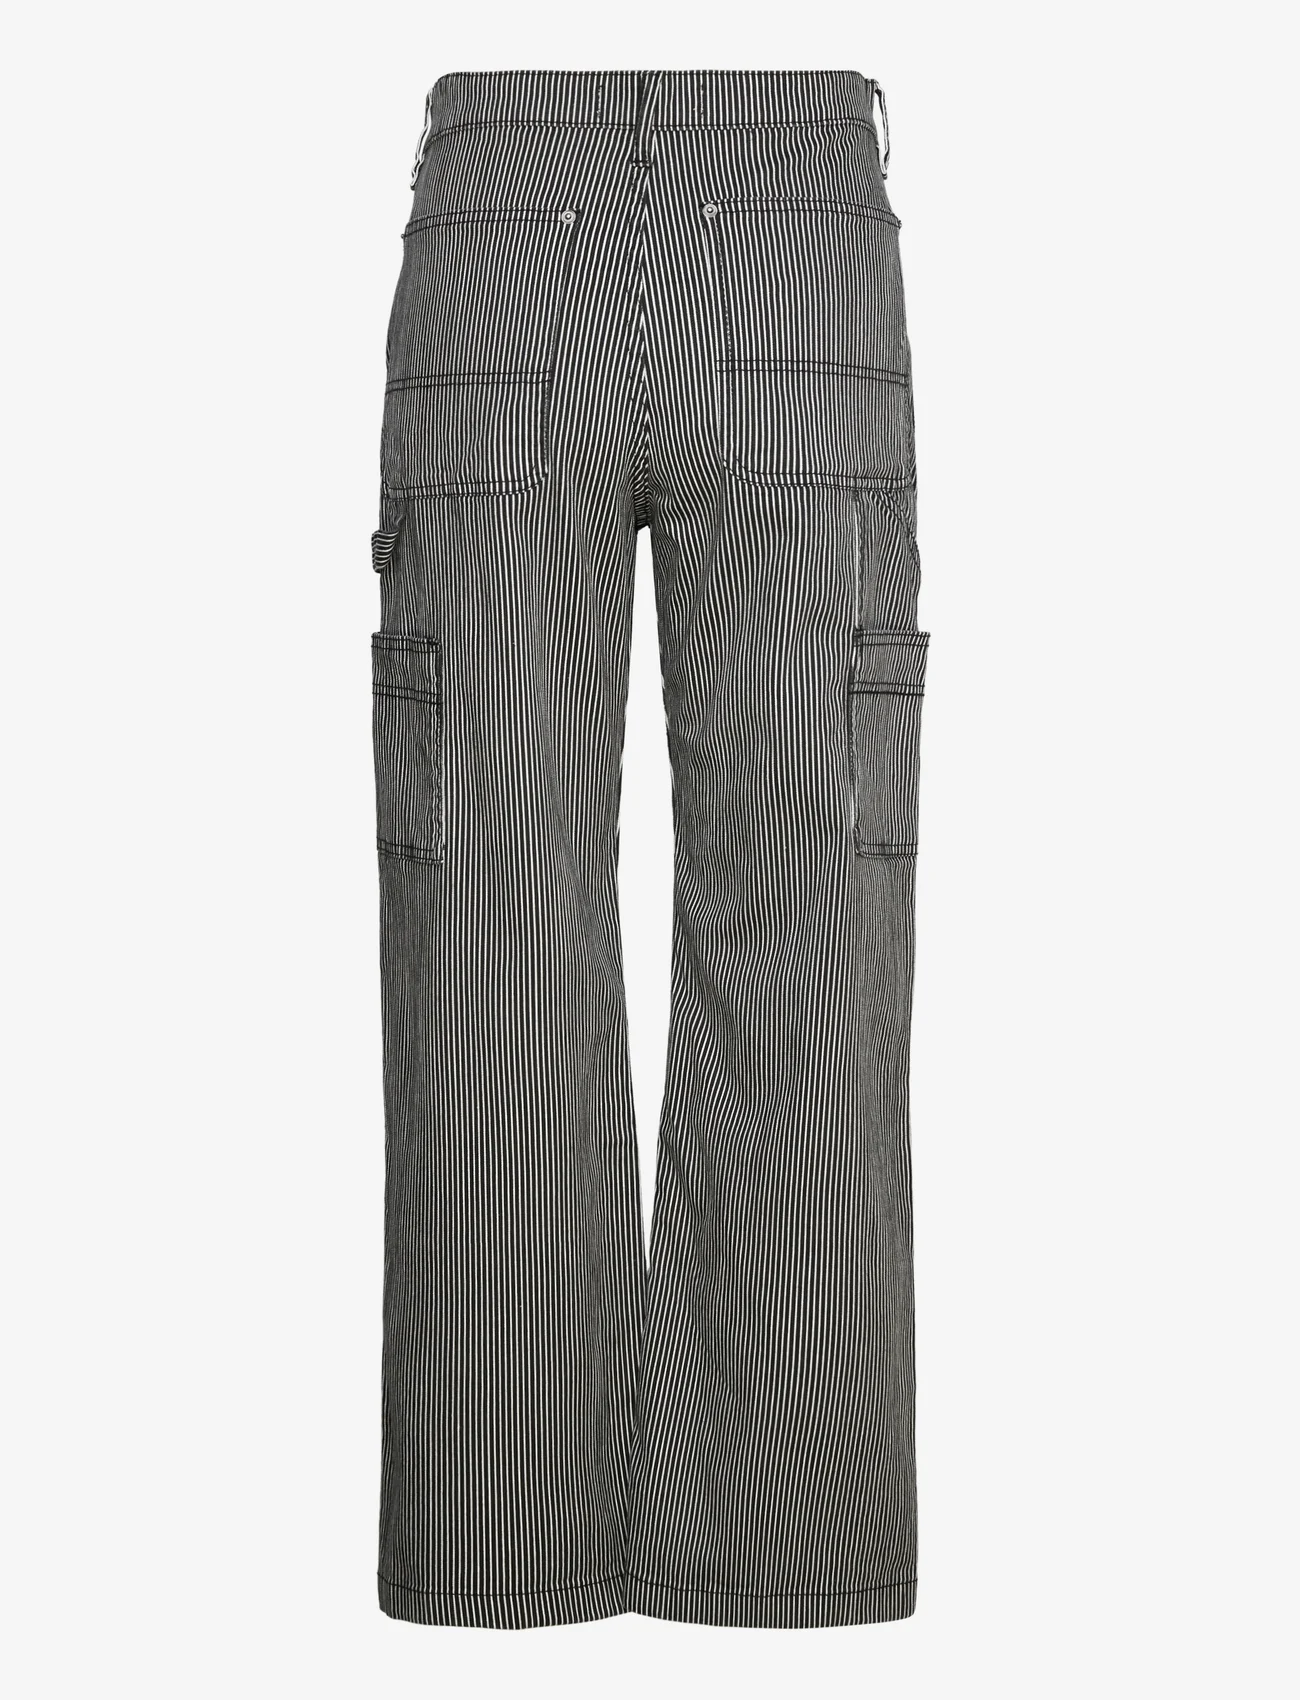 Sofie Schnoor - Trousers - wide leg jeans - white black striped - 1